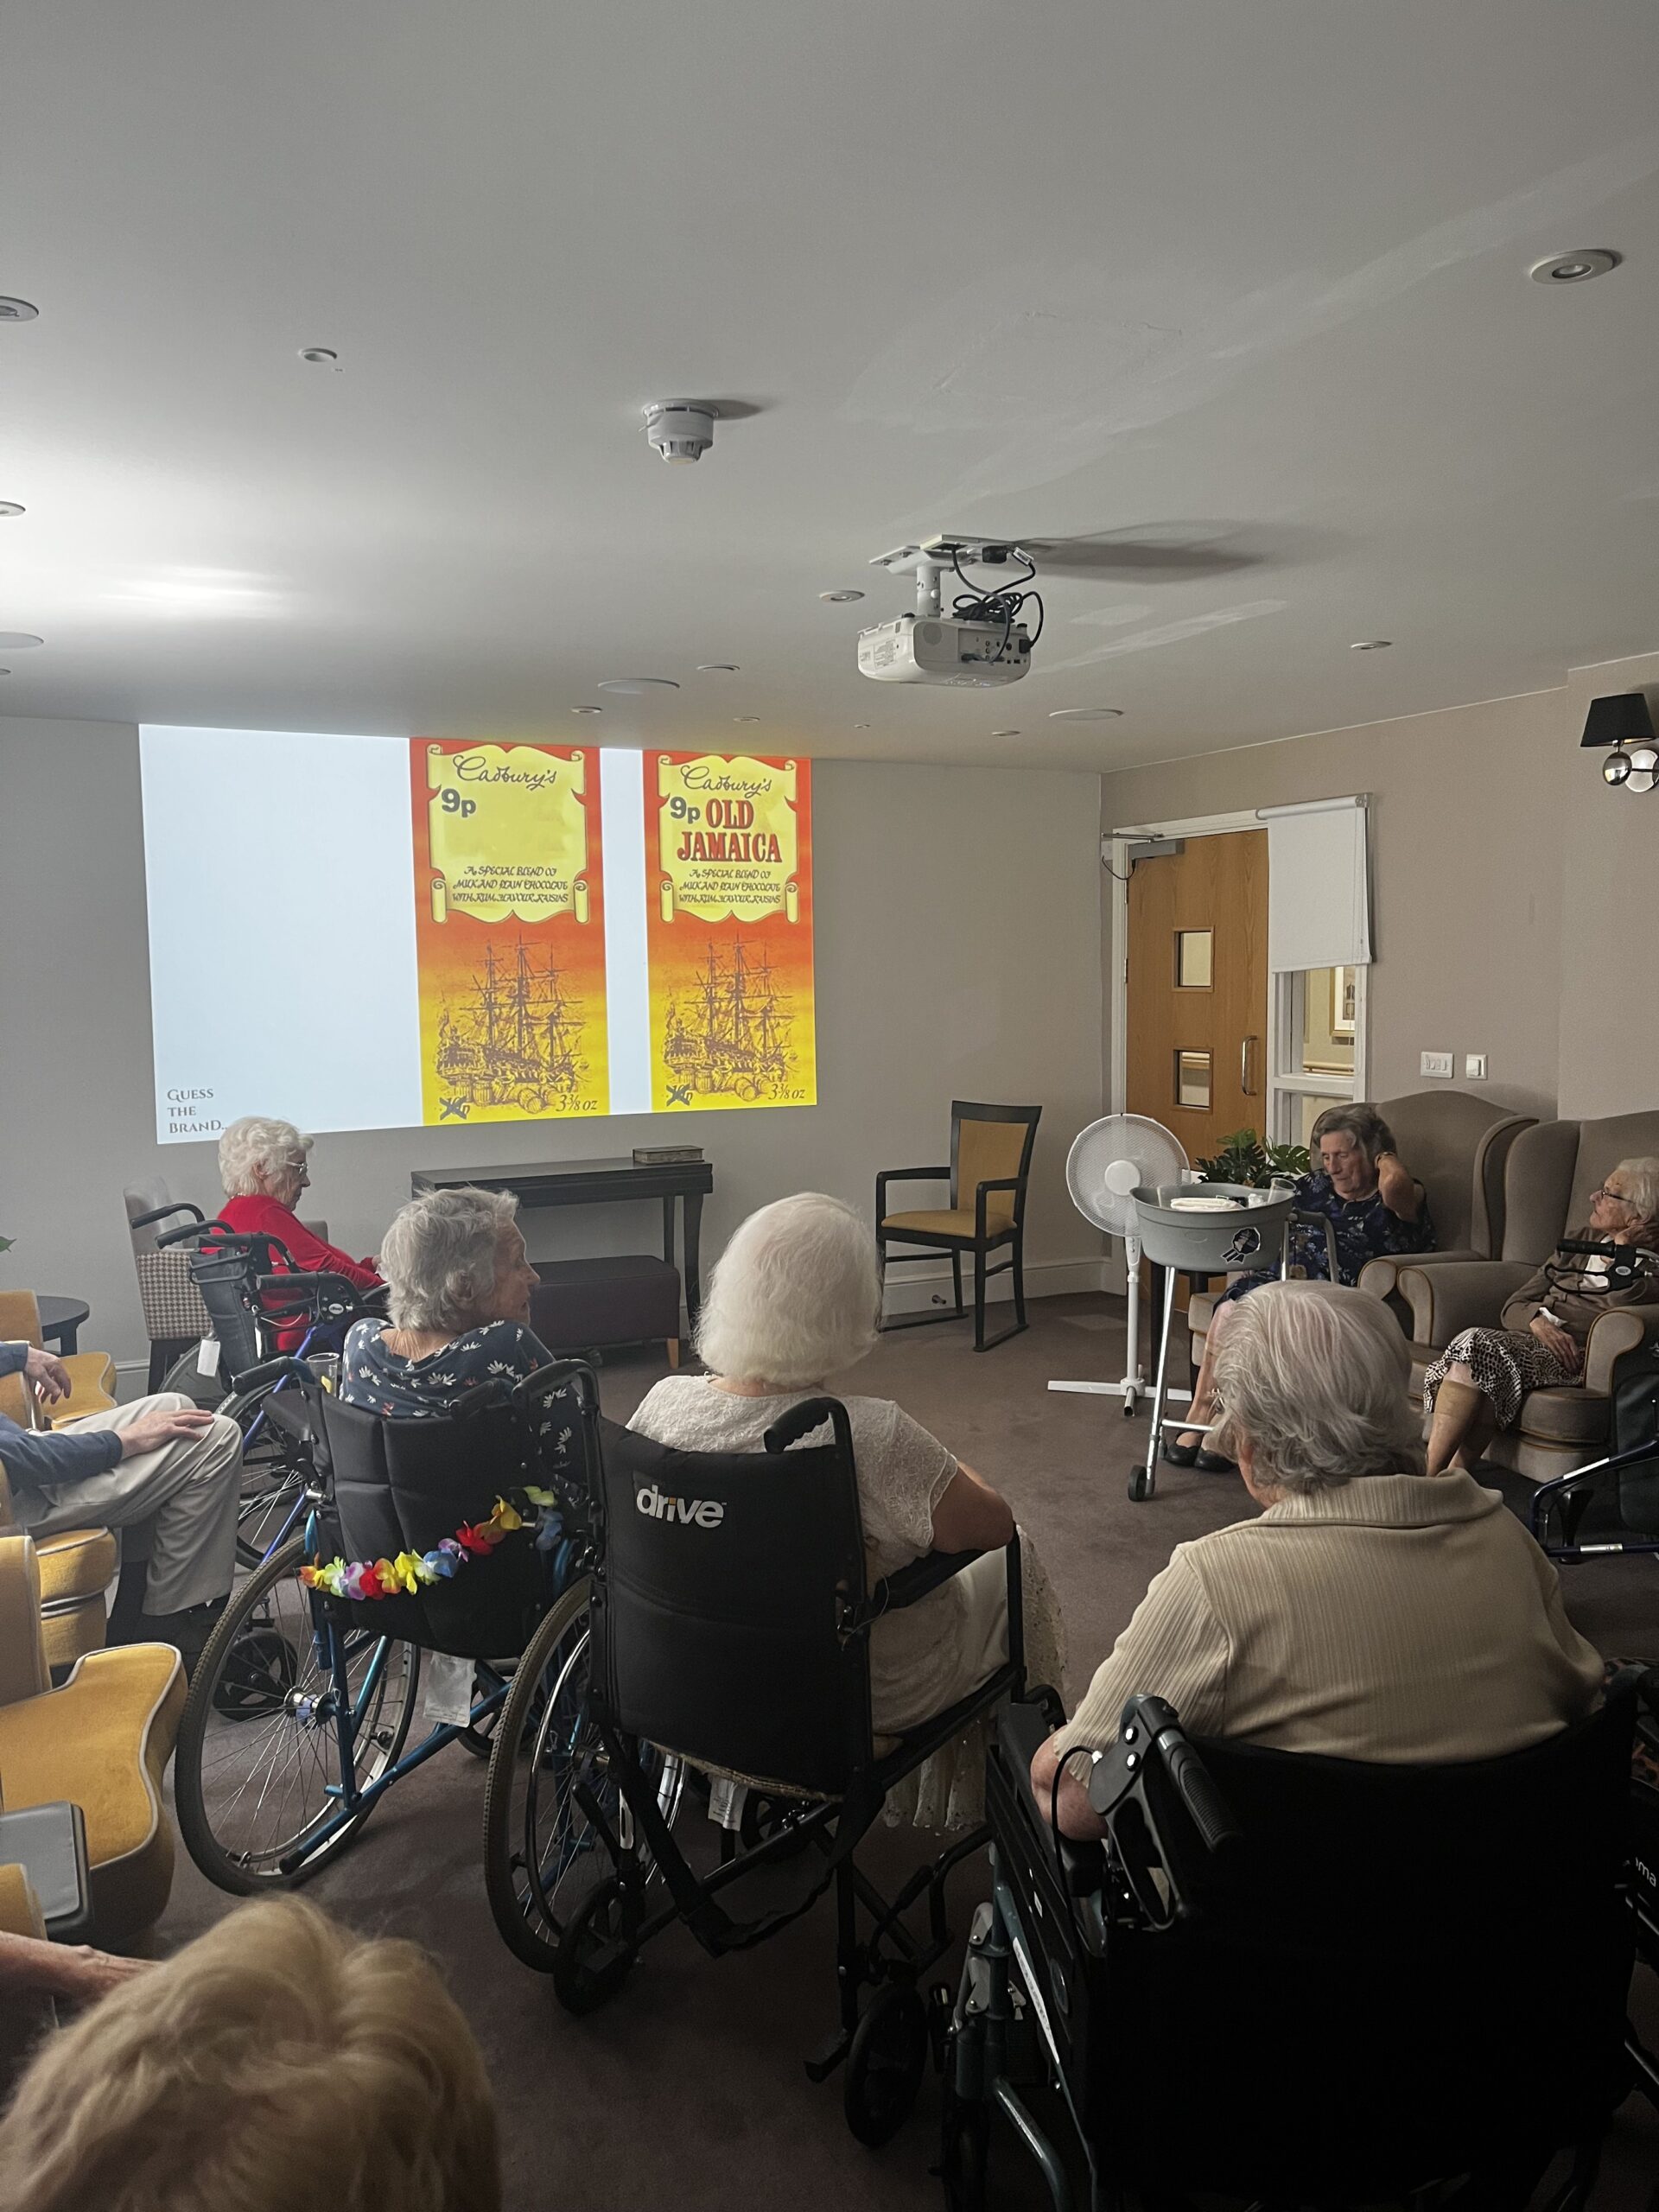 Our residents sat together watching a television programme on a projector at Harrier Grange Care Home